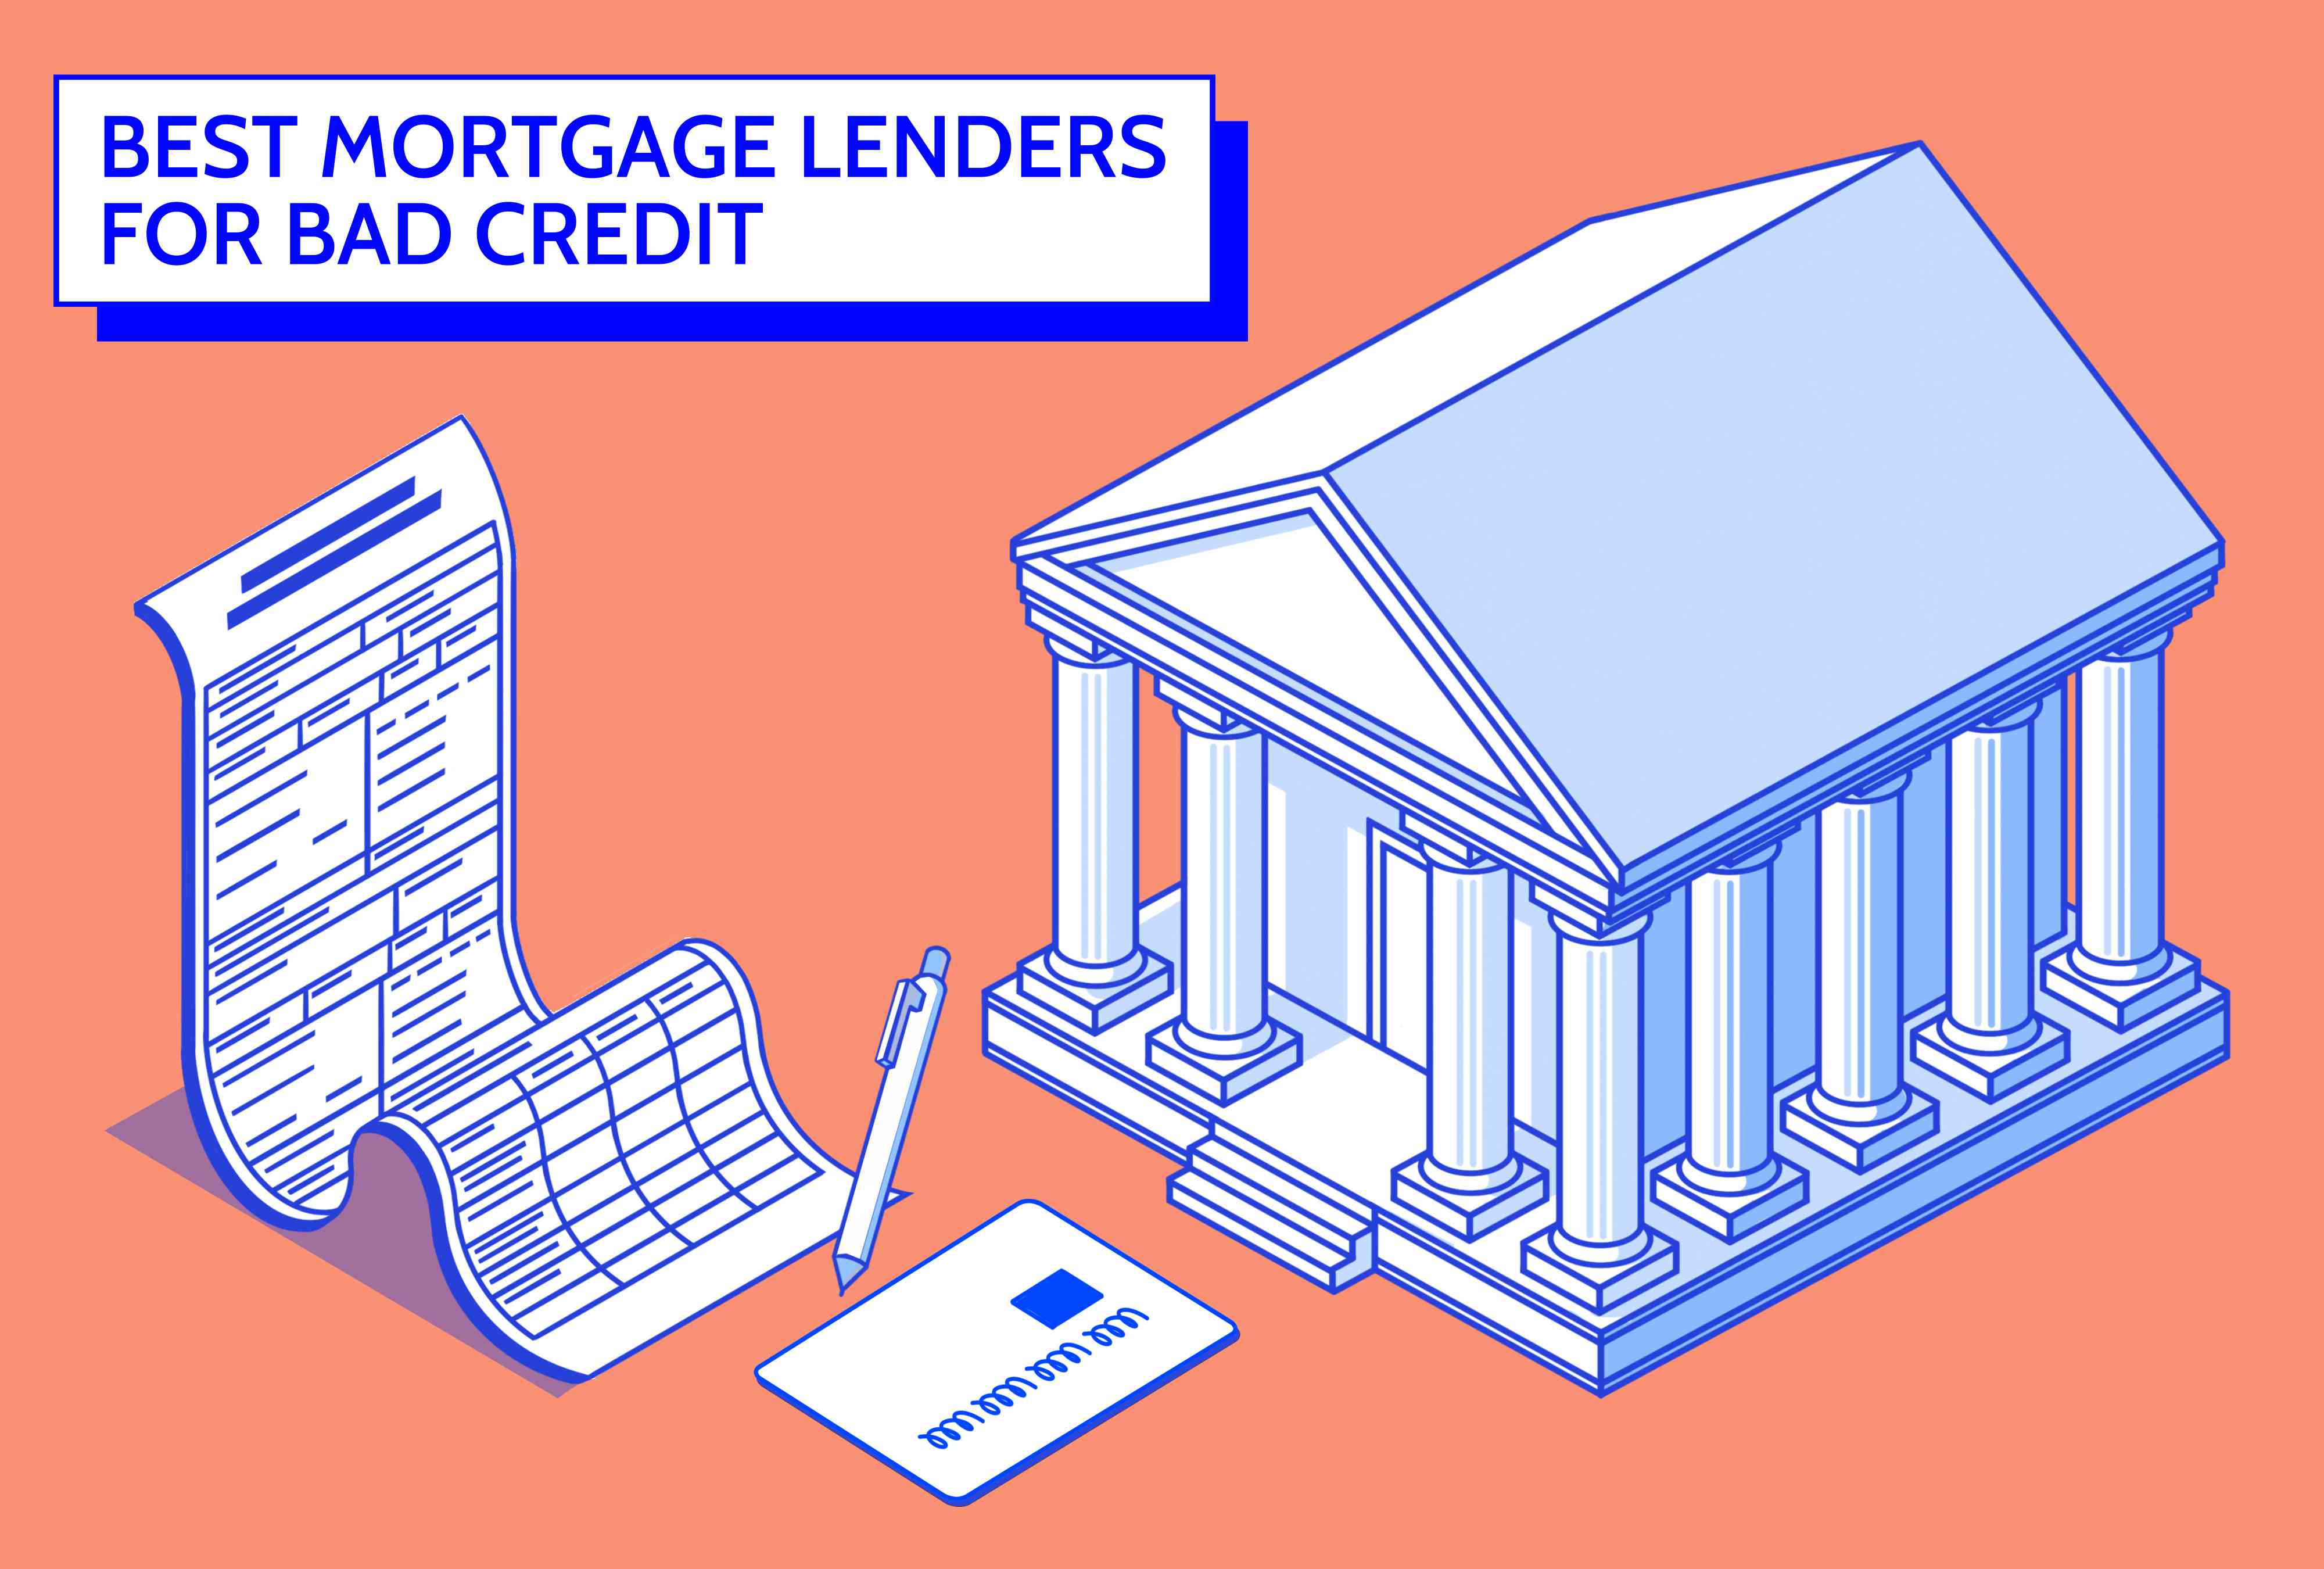 Custom illustration shows a title of "Best Mortgage Lenders for Bad Credit" on an orange background with a blue and white columned building and a credit card, pen, and contract paper.